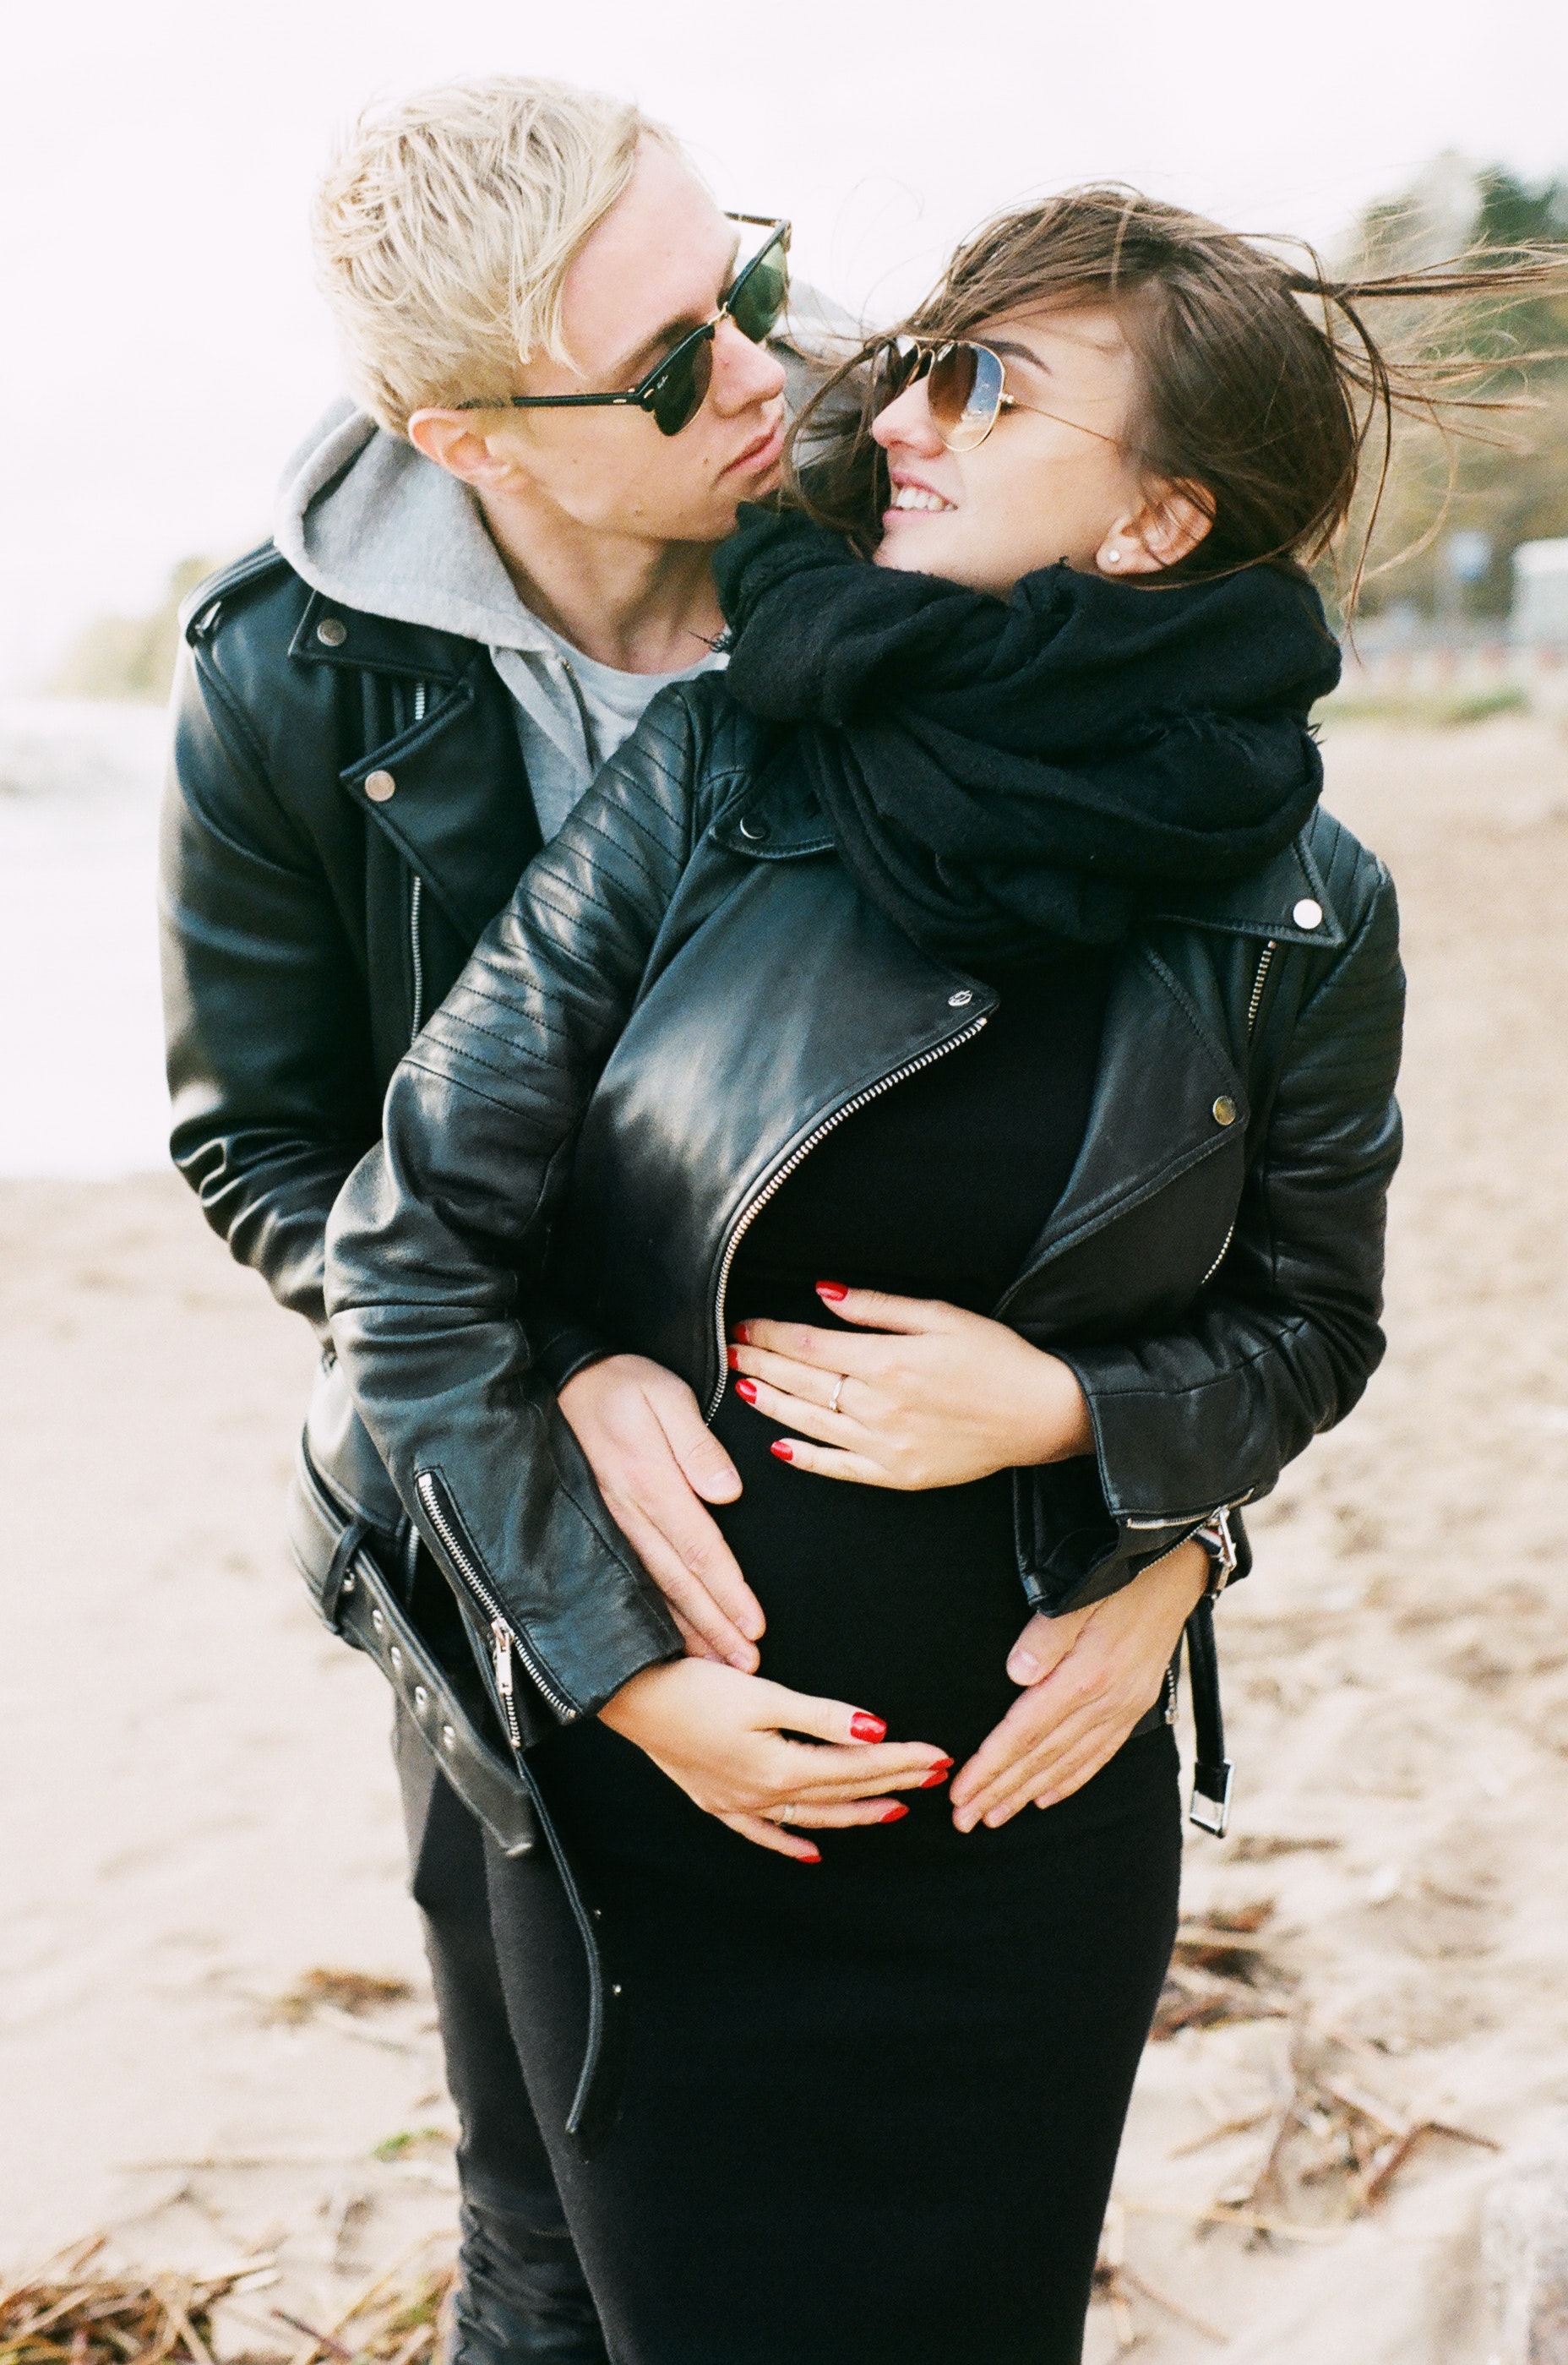 Man in black leather zip jacket hugging woman in black leather zip jacket and black pants standing on sand at daytime photo